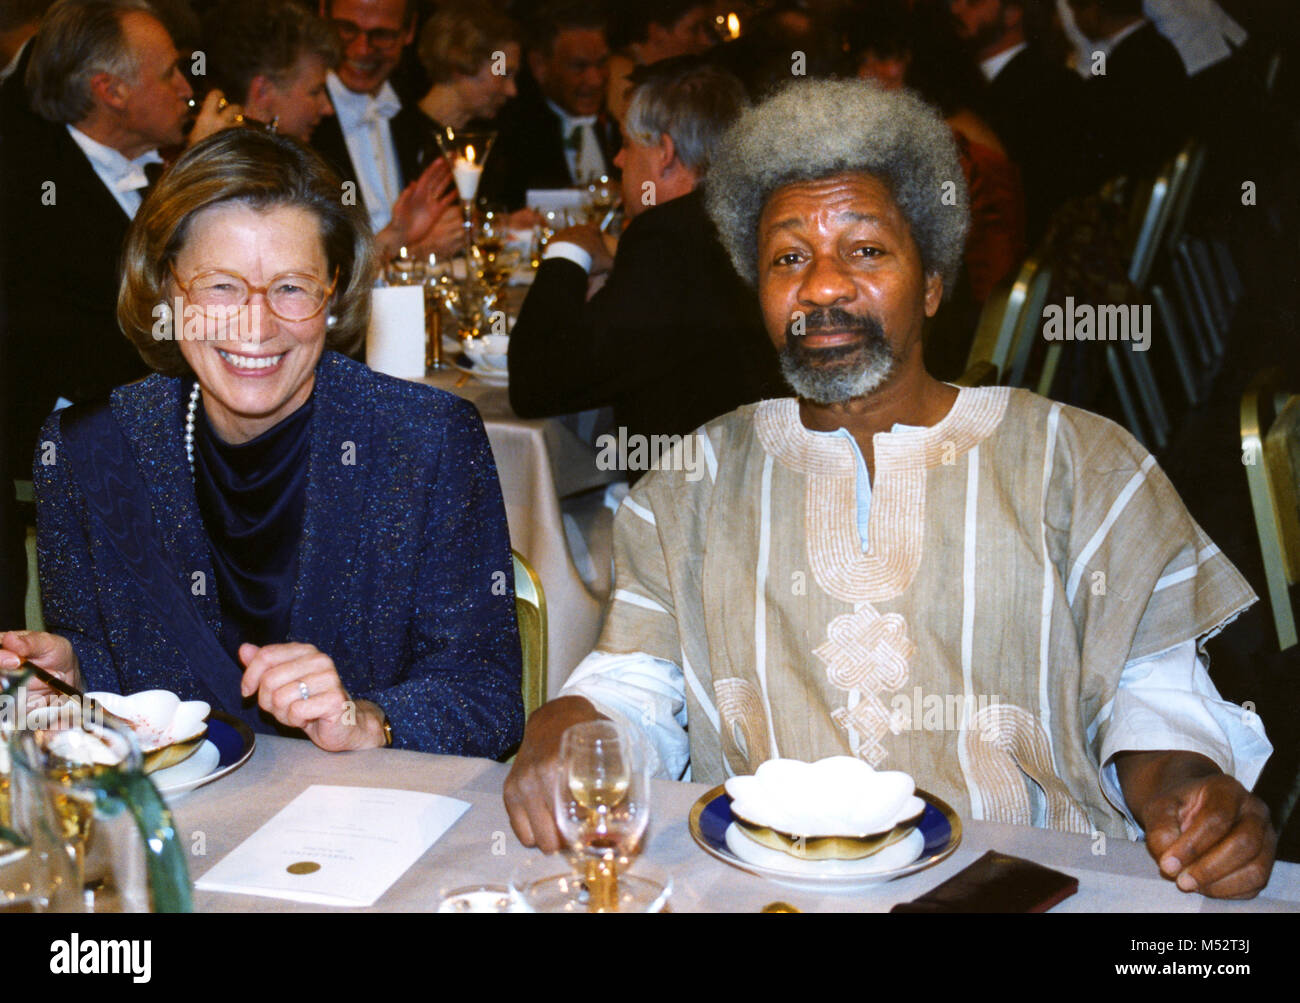 WOLE SOYINKA Nigerian author and Nobel Laureate in Literature 1986 at Nobel banquet with Swedens minister of Foraign affairs Margaretha af Ugglas Stock Photo